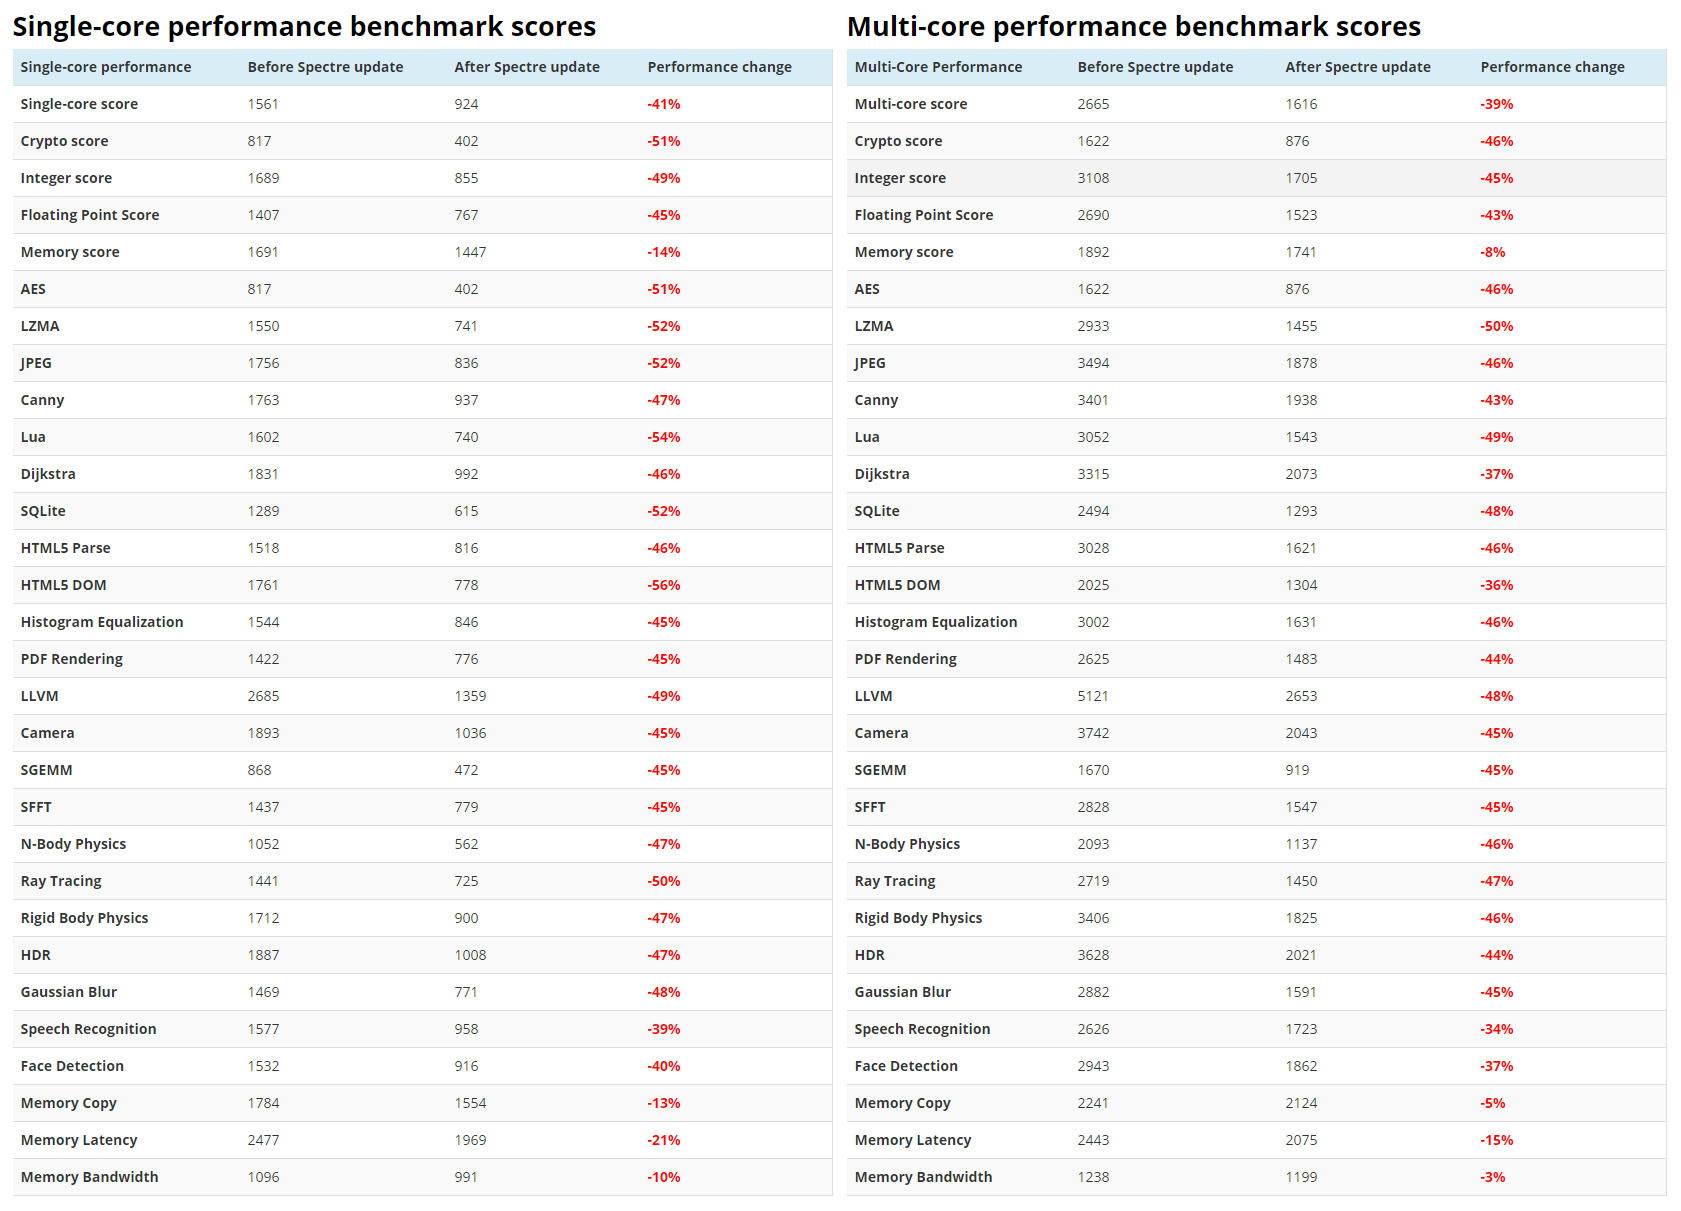 spectre_update_benchmark_iphone6_single_multi.png